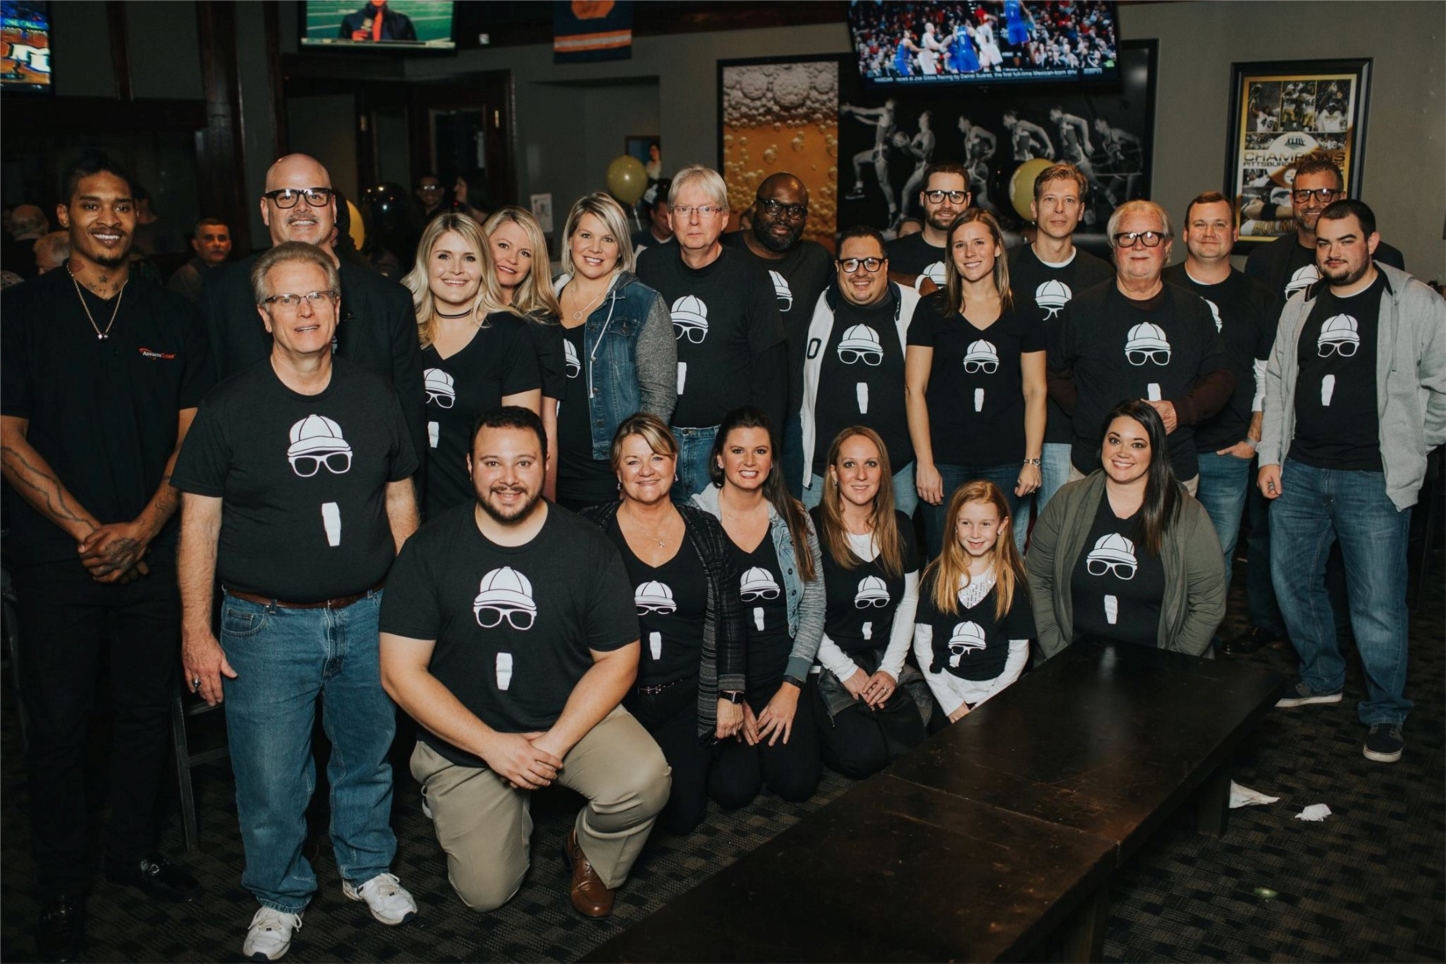 Group shot of (most of) our Home Office staff at our Undercover Boss Viewing party. Our CEO went “undercover: and the episode premiered in January 2017. 